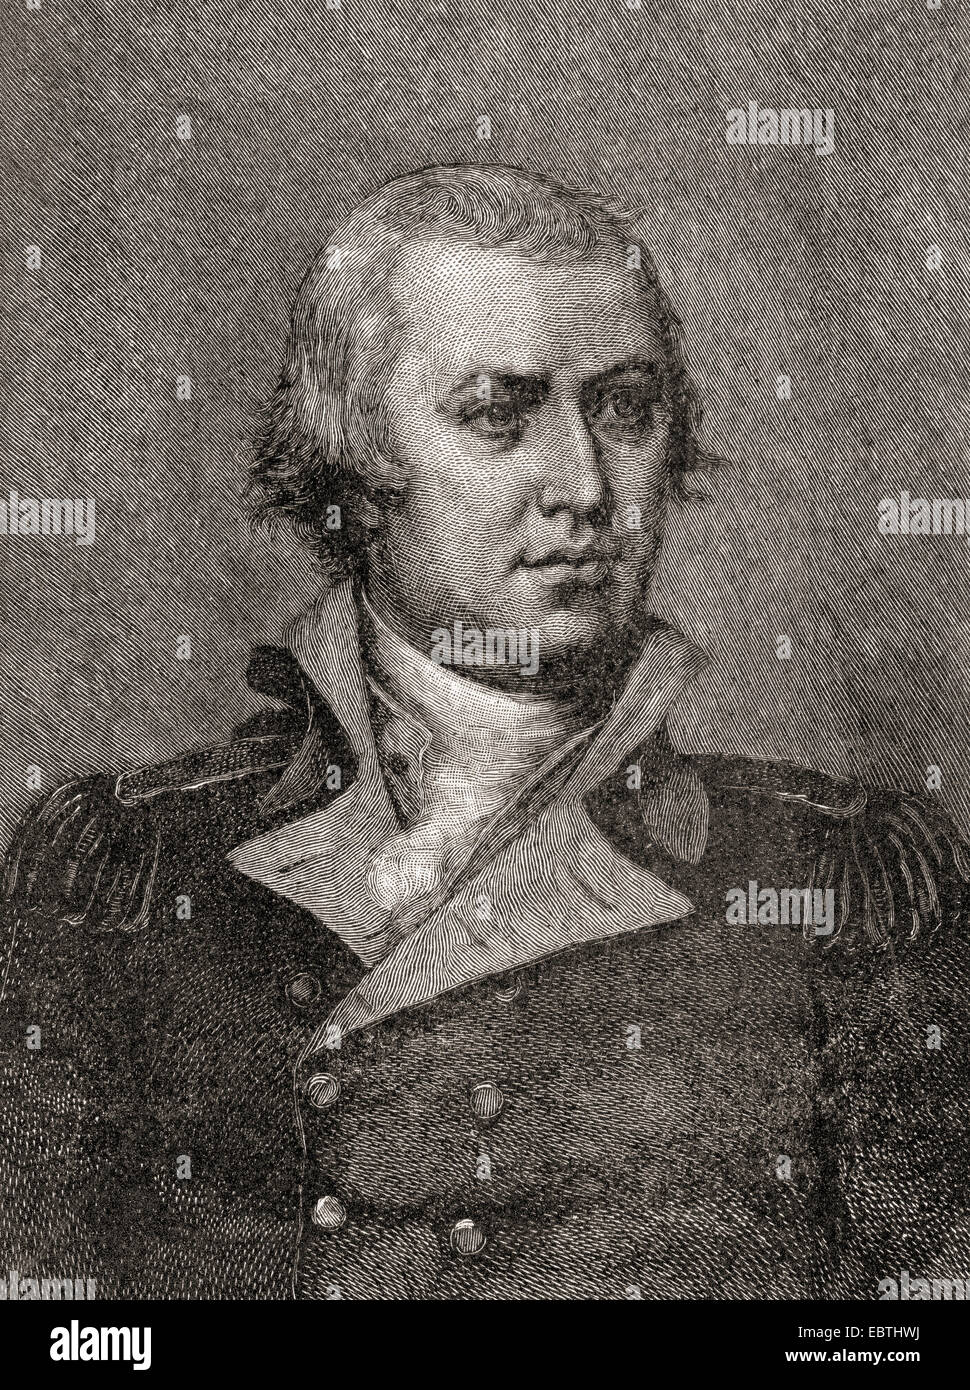 Infinite Photographs Photo General Nathanael Greene,1742-1786,Major General in Continental Army